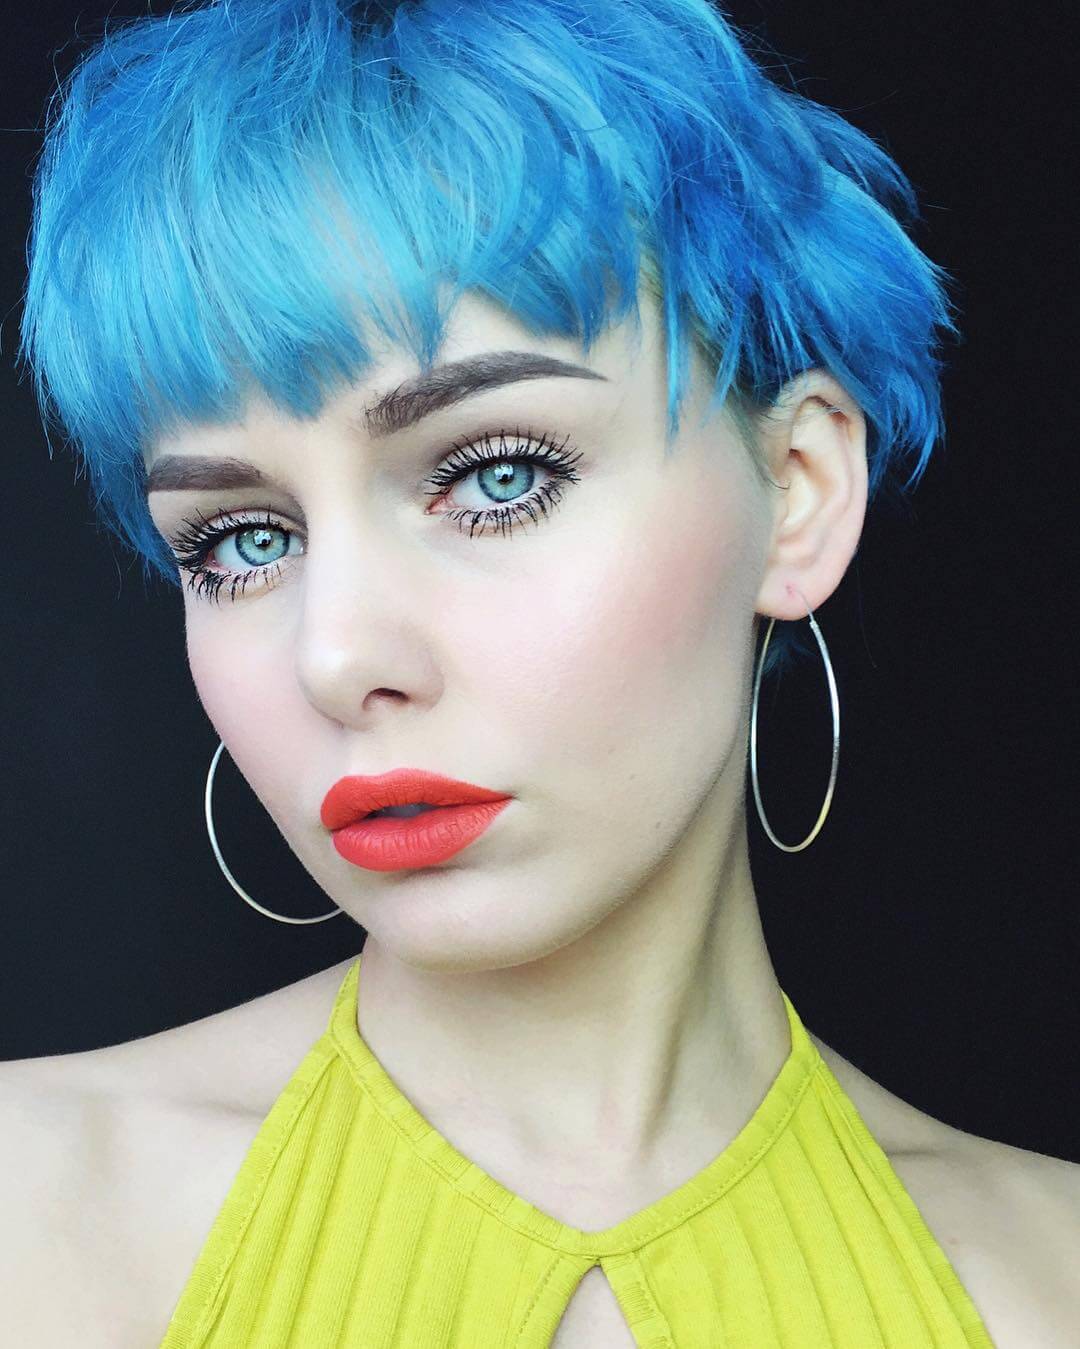 Short blue hairstyle with bangs by annakarinhell